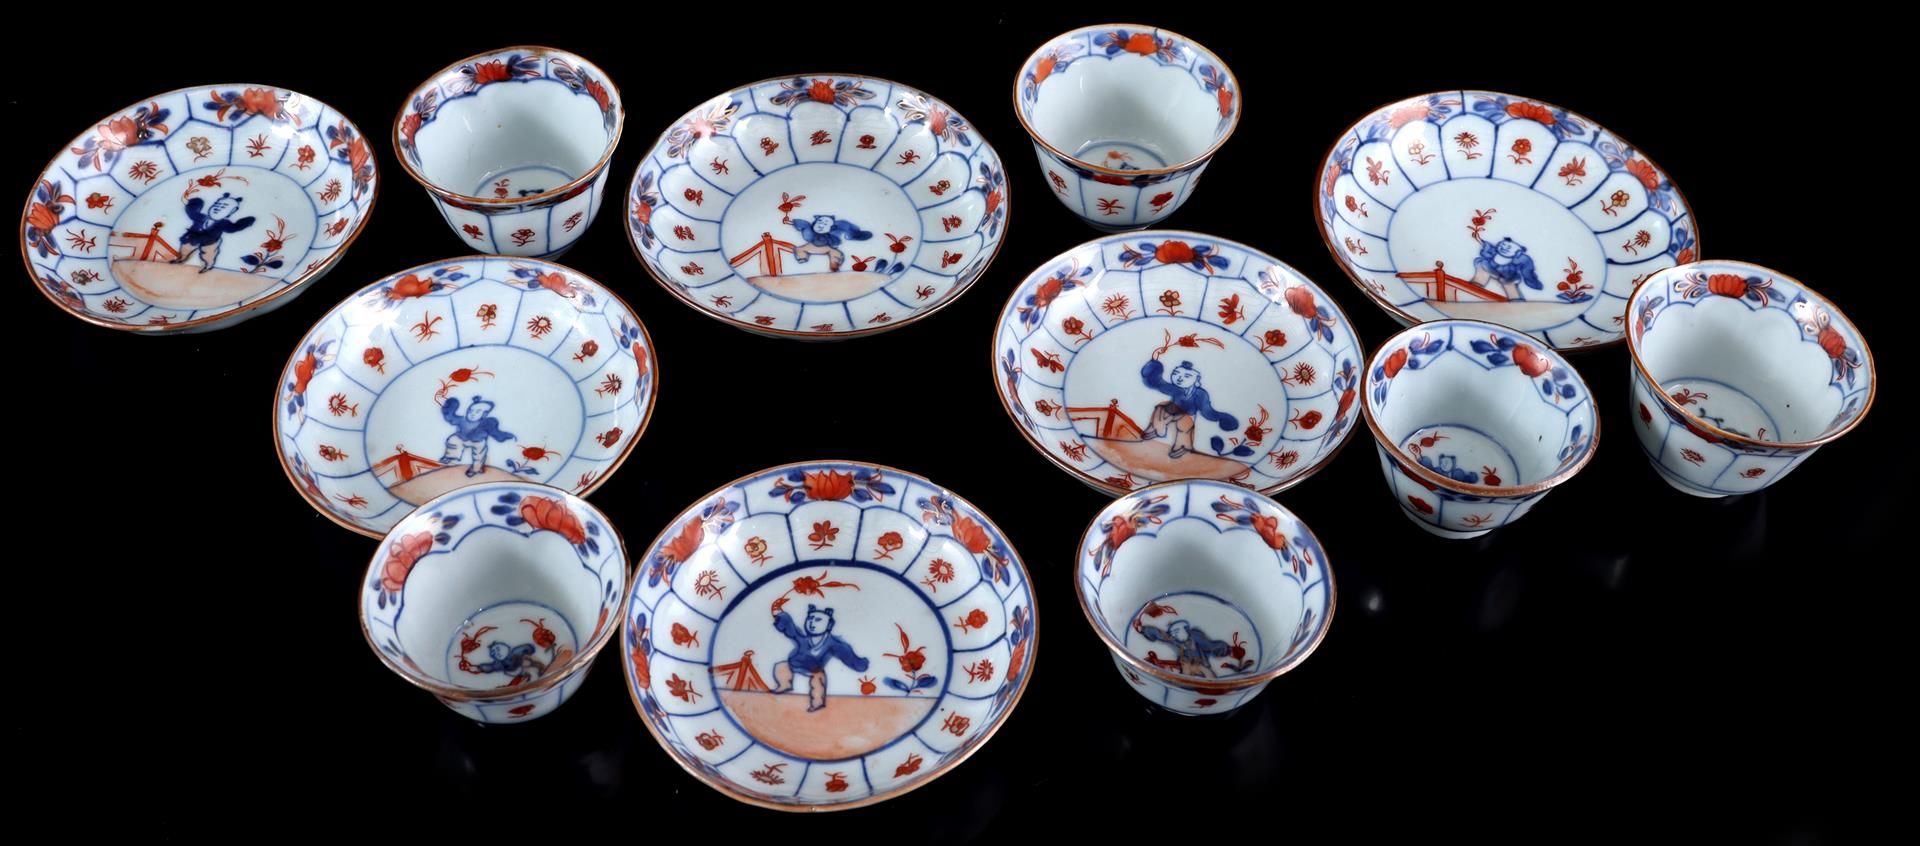 5 and 1 porcelains - Image 3 of 3